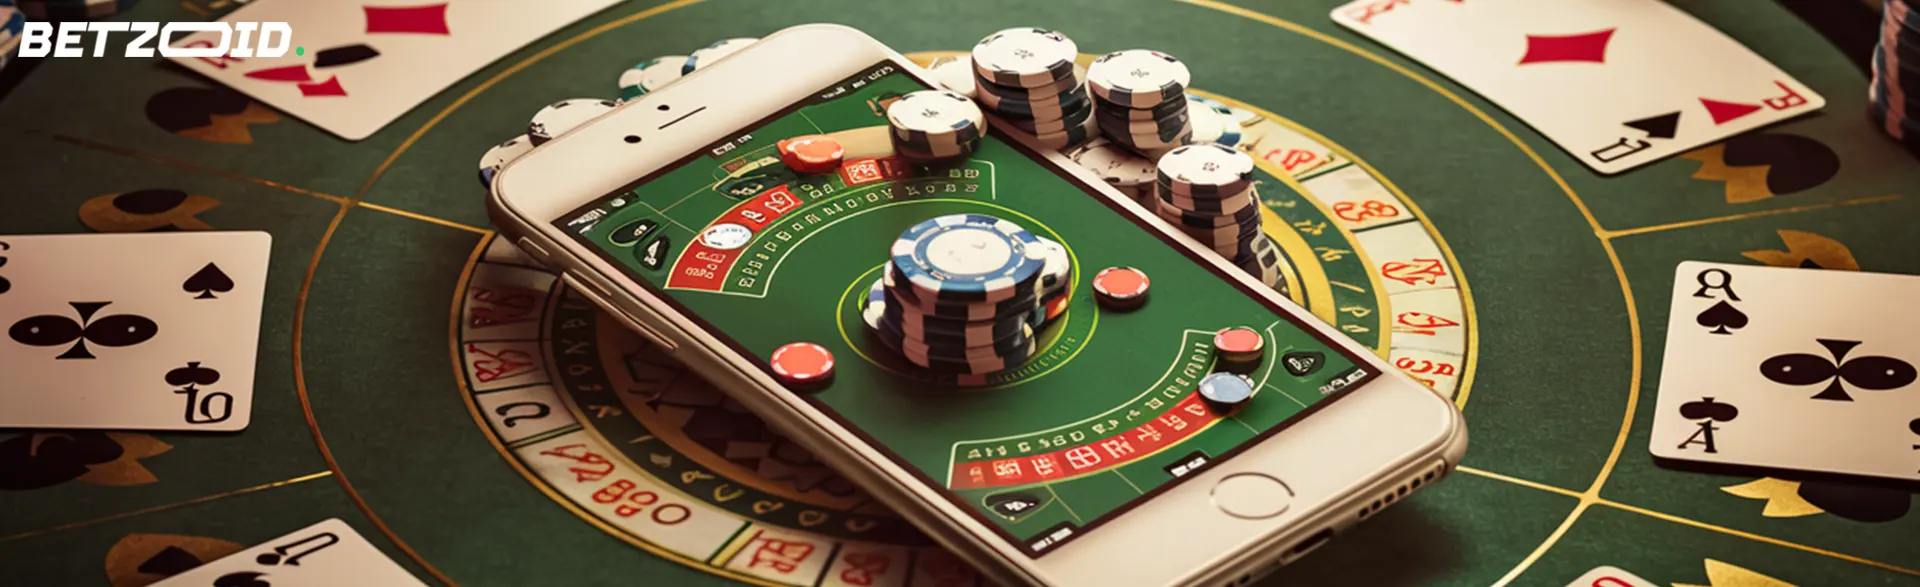 Pay by phone casinos in Australia.